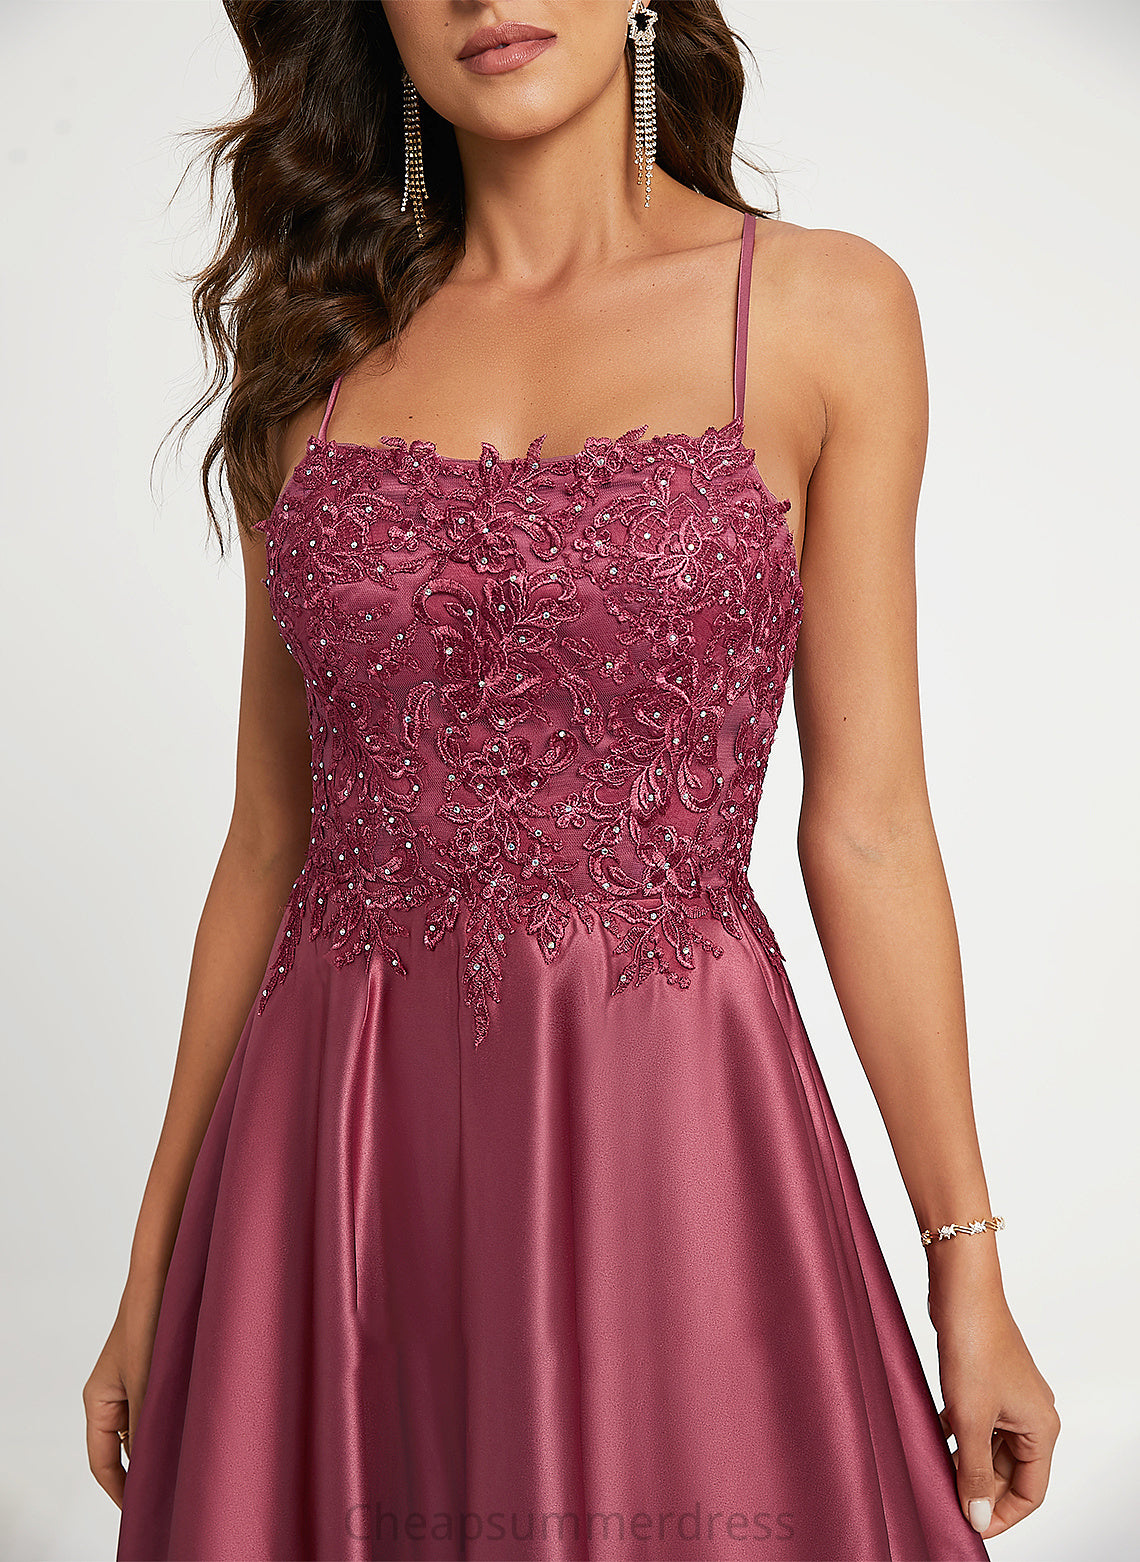 Square Sweep Beading A-Line With Sequins Satin Train Adalyn Neckline Prom Dresses